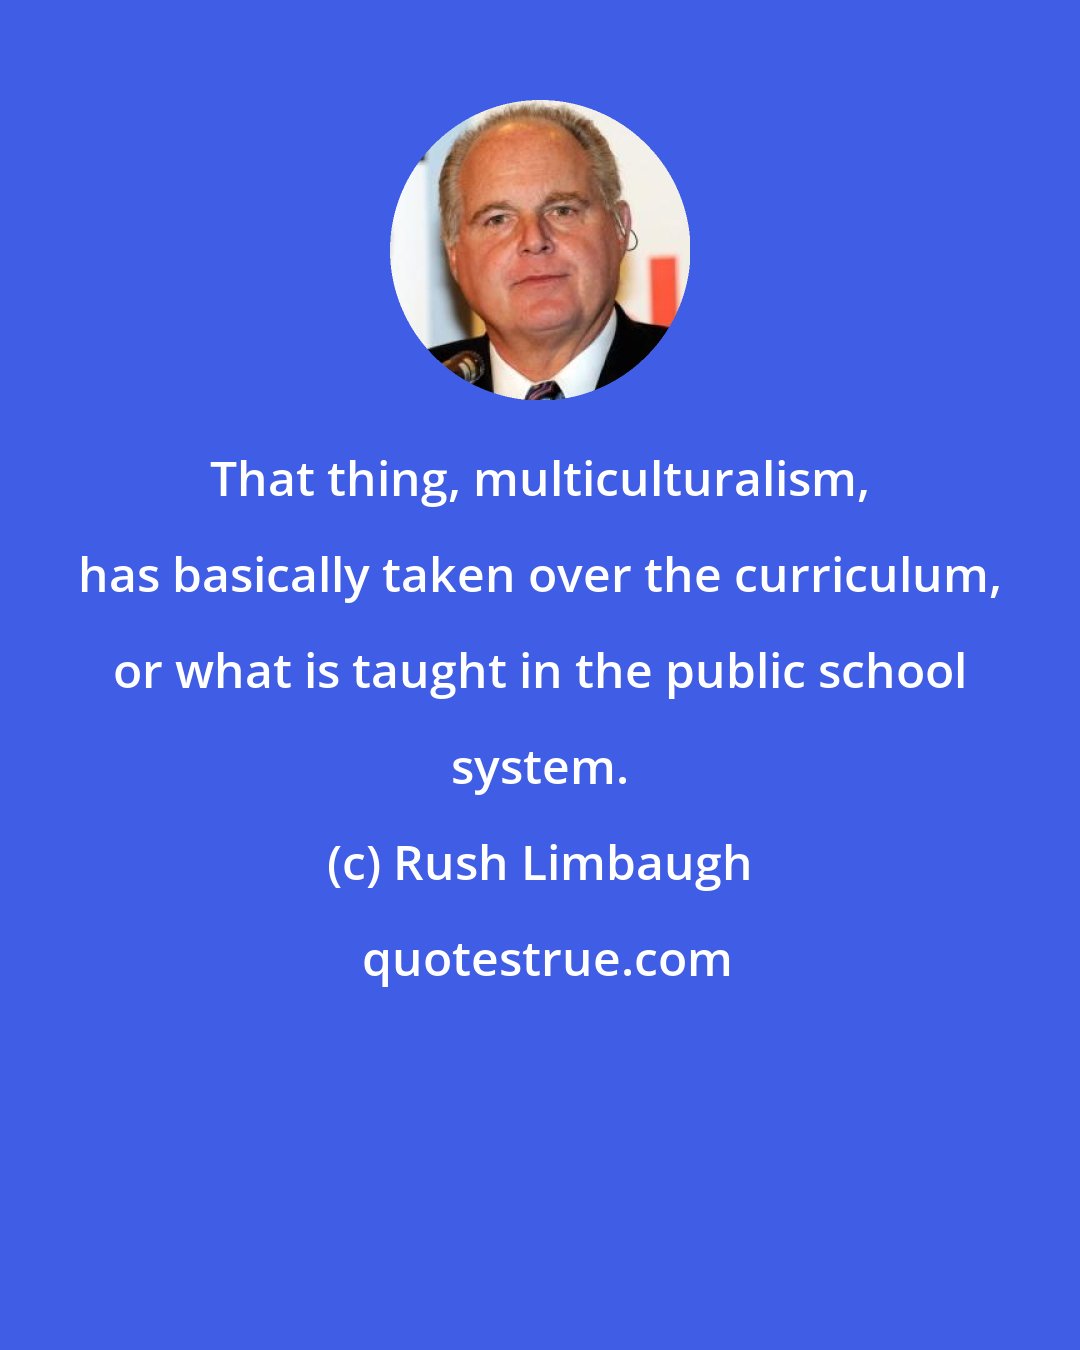 Rush Limbaugh: That thing, multiculturalism, has basically taken over the curriculum, or what is taught in the public school system.